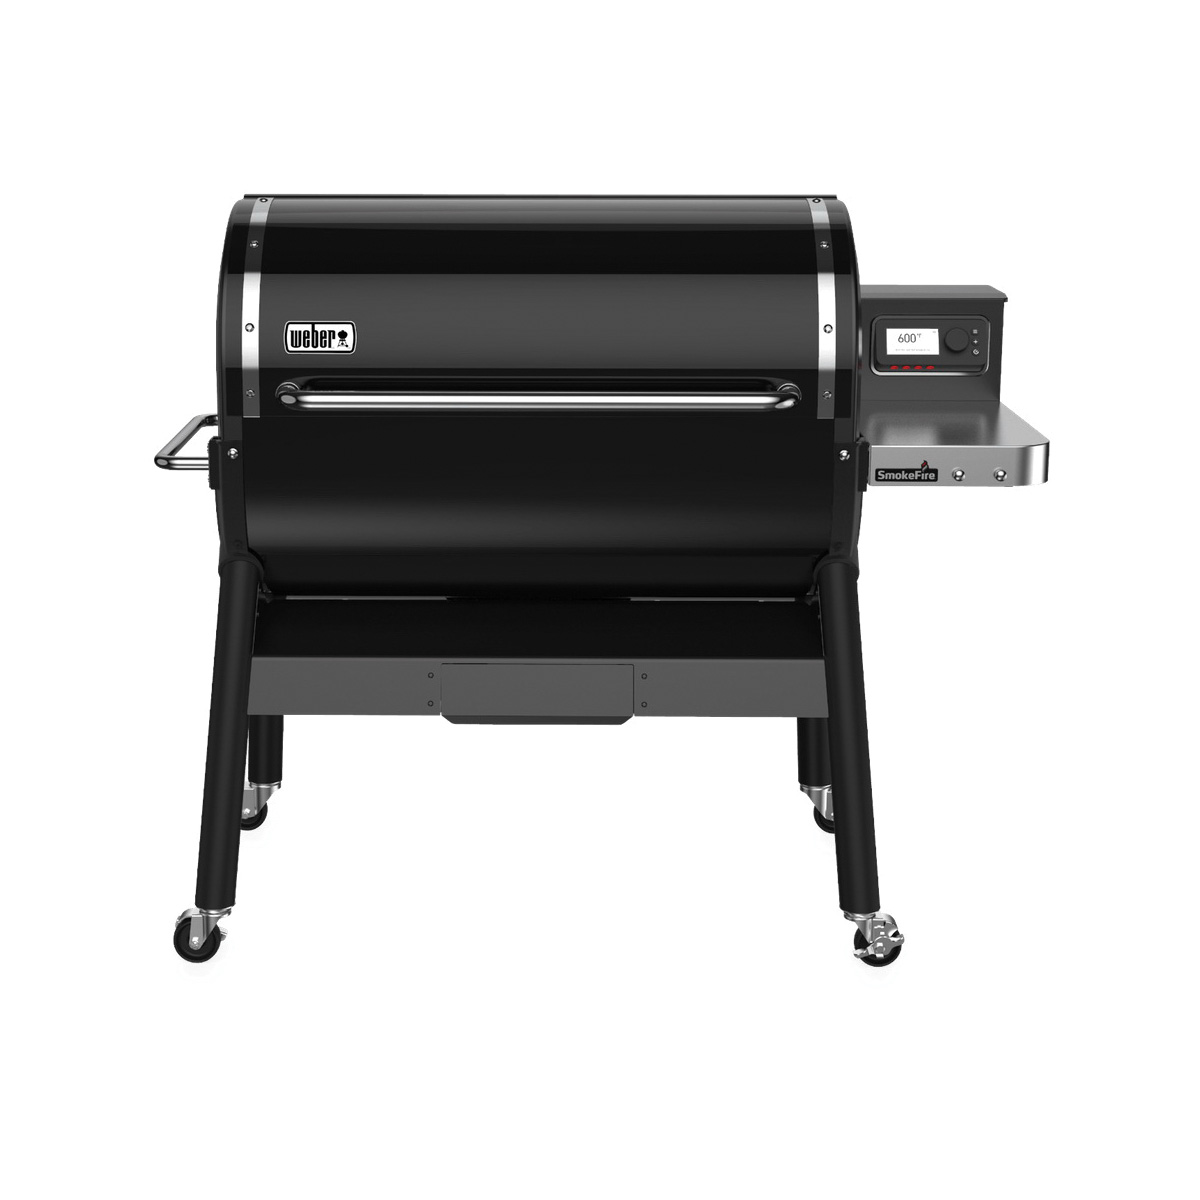 Weber SmokeFire 23510001 Pellet Grill, 1008 sq-in Primary Cooking Surface, Side Shelf Included: Yes, Steel Body, Black